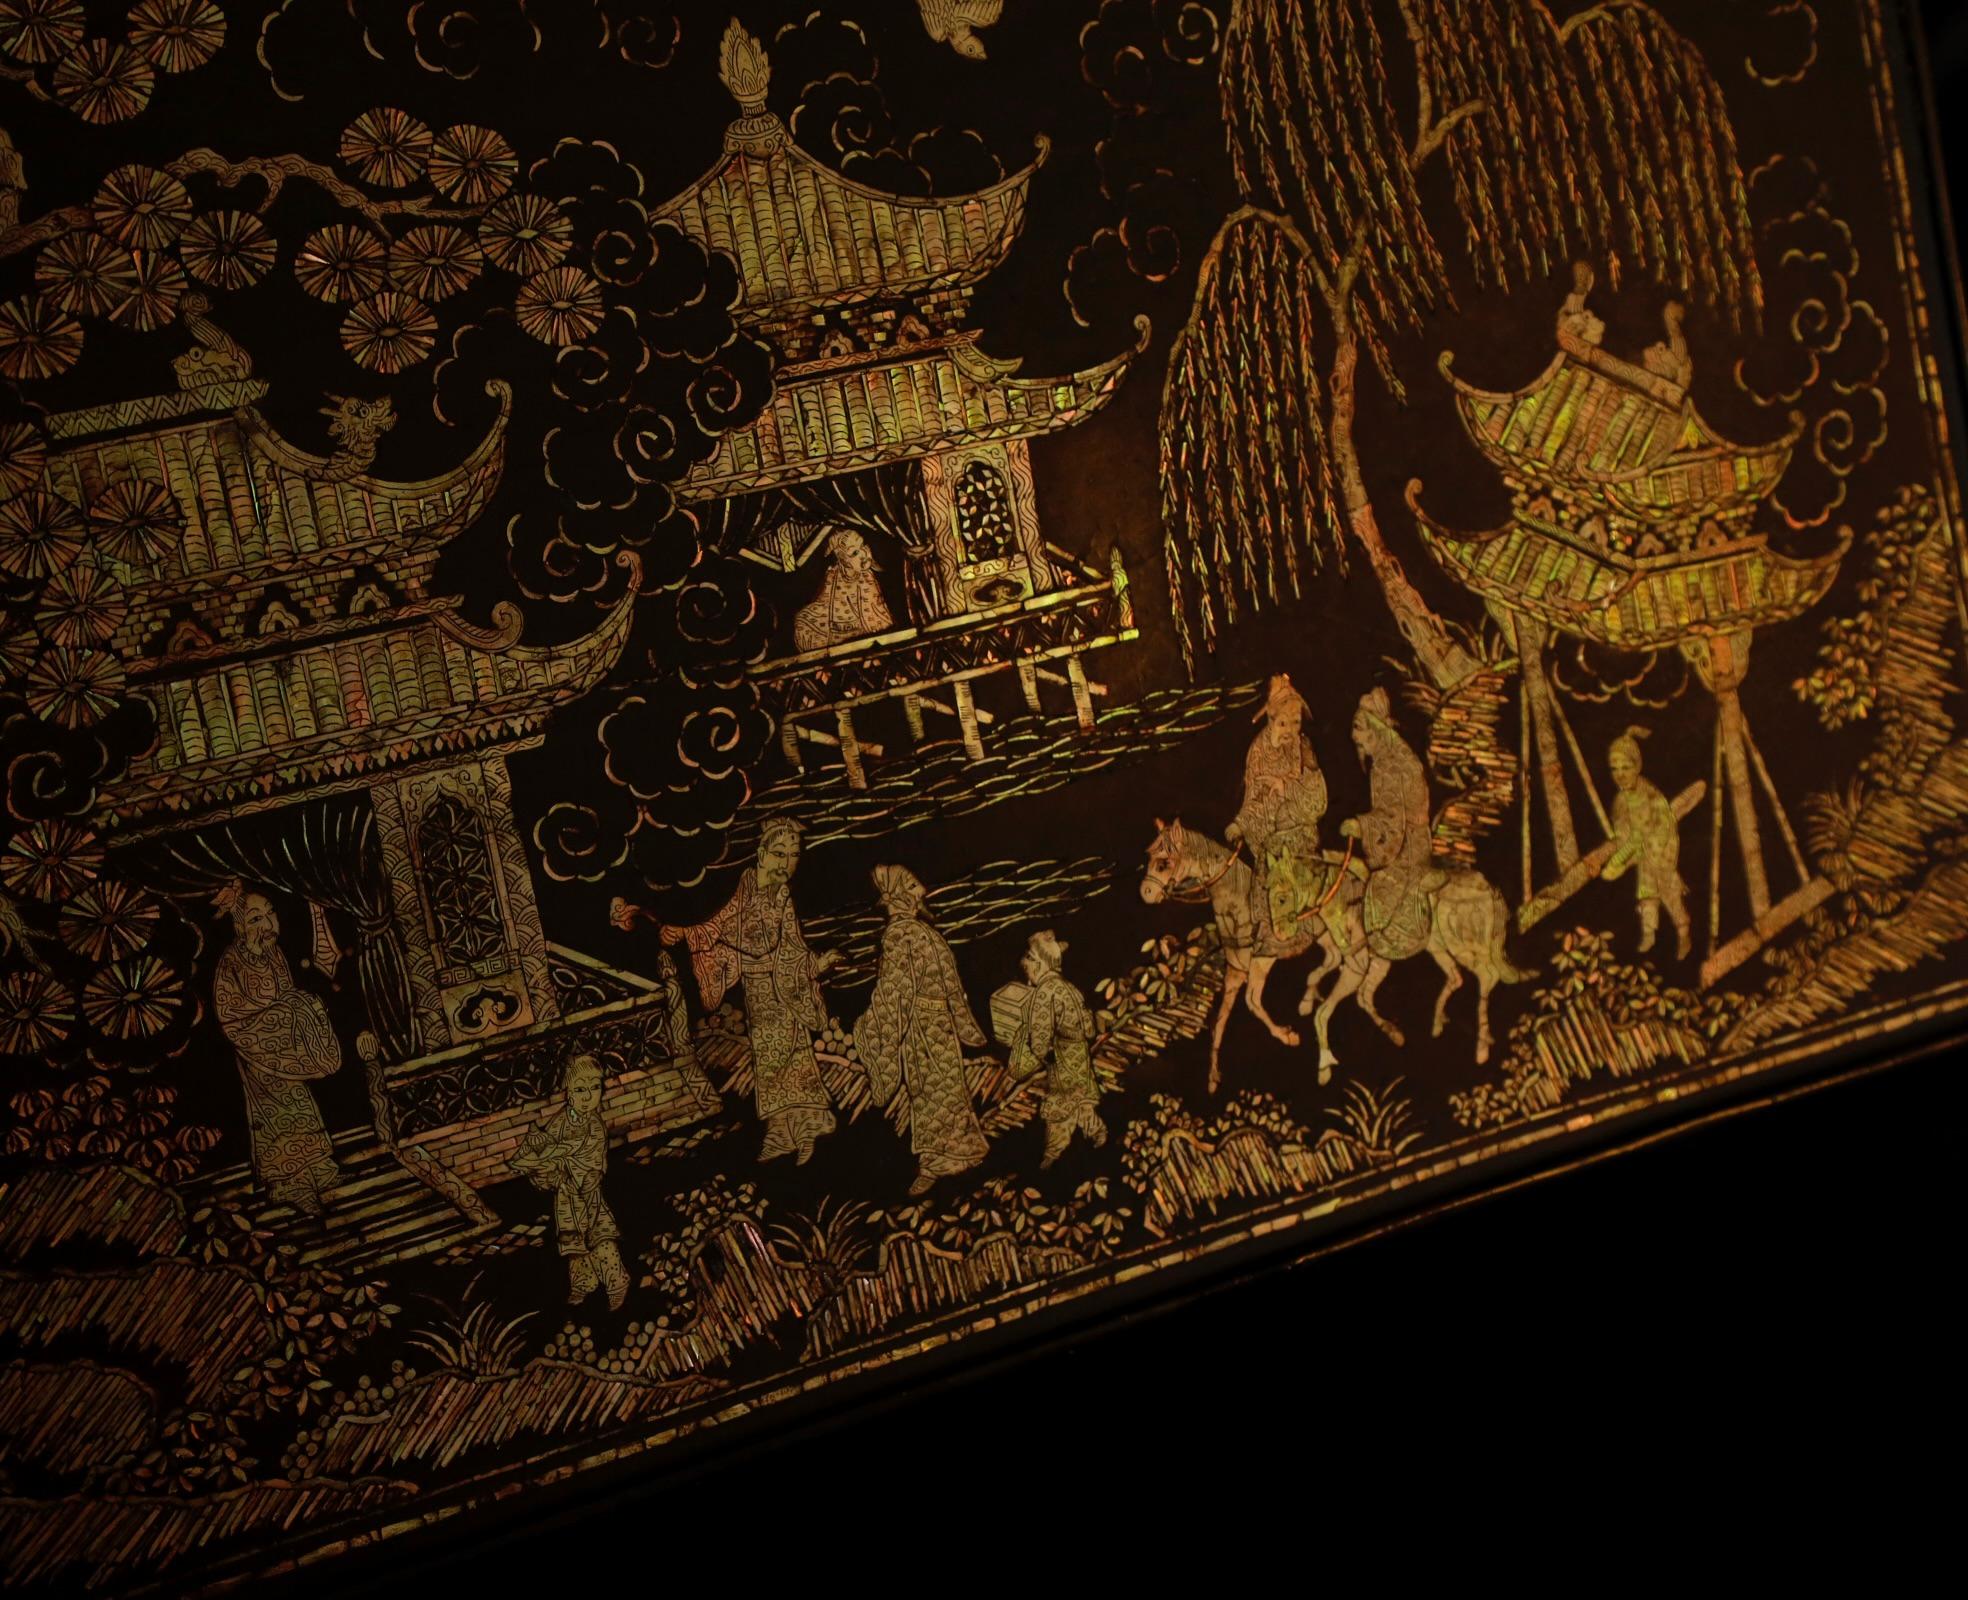 Hand-Crafted Ming Dynasty Period Scholar's Garden: Mother-of-Pearl Inlaid Lacquer Kang Table For Sale